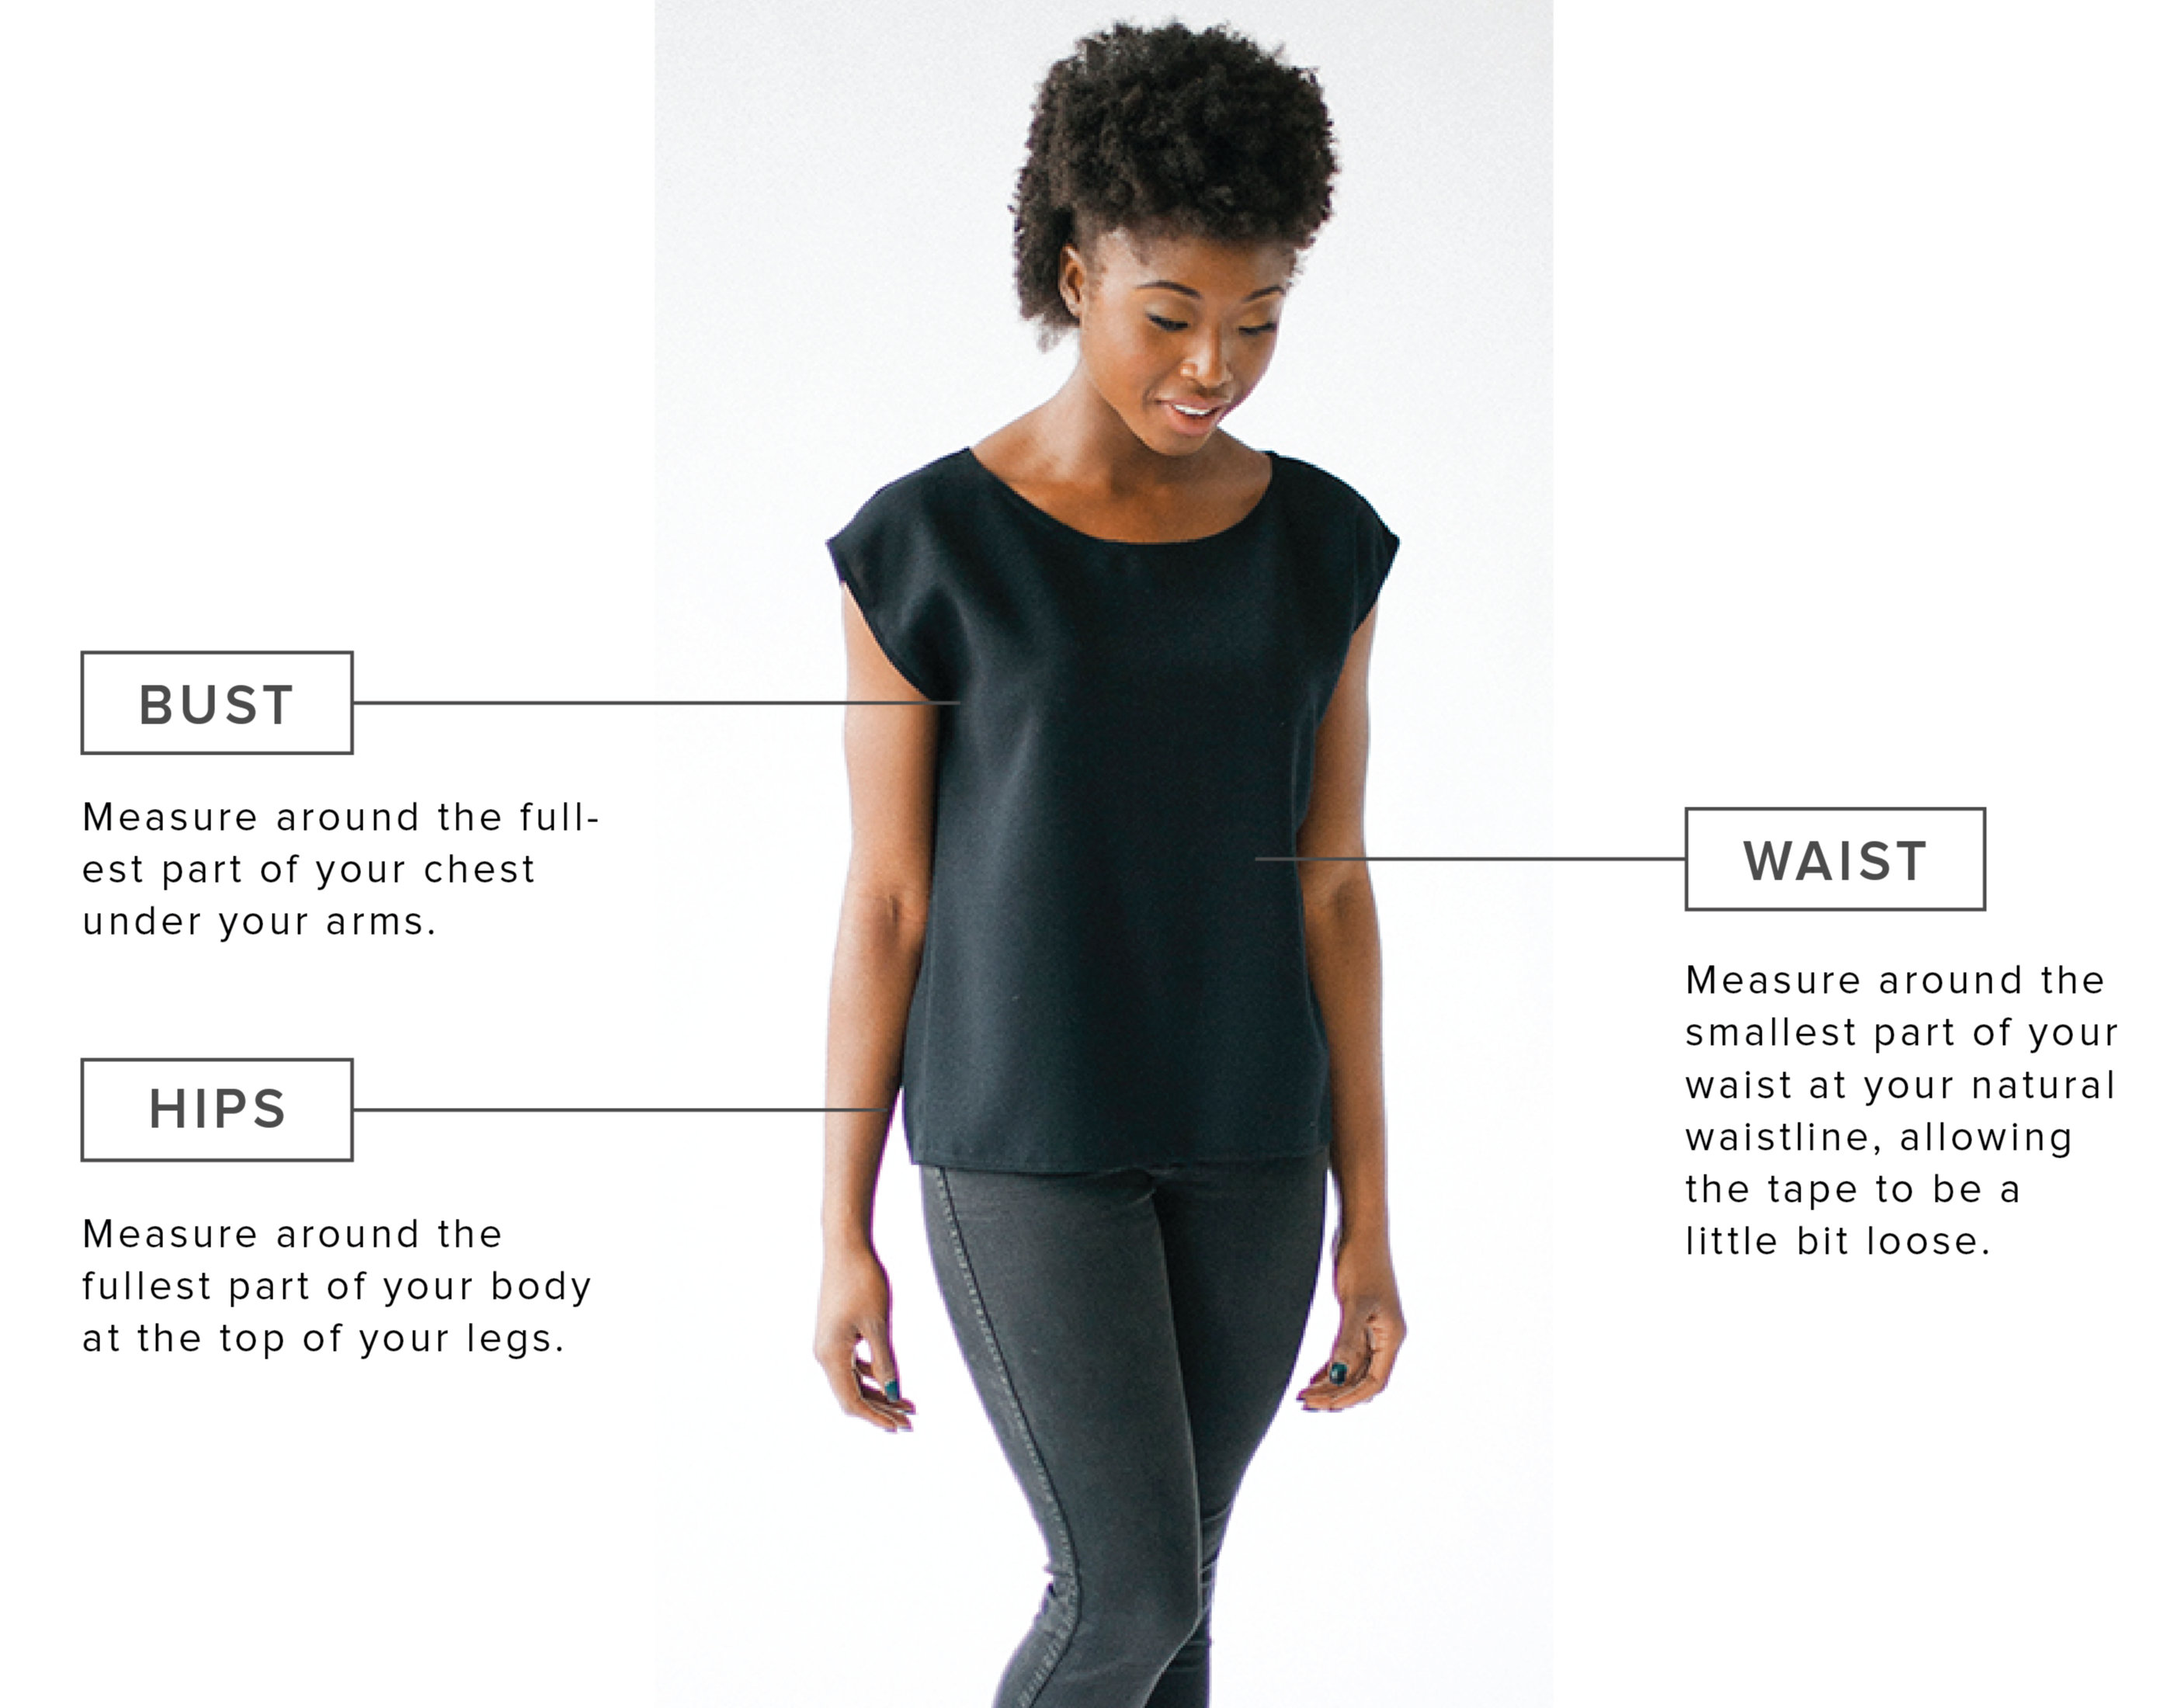 Bust: Measure around the fullest part of your chest under your arms. Hips: Measure around the fullest part of your body at the top of your legs. Waist: Measure around the smallest part of your waist at your natural waistline, allowing the tape to be a little bit loose.